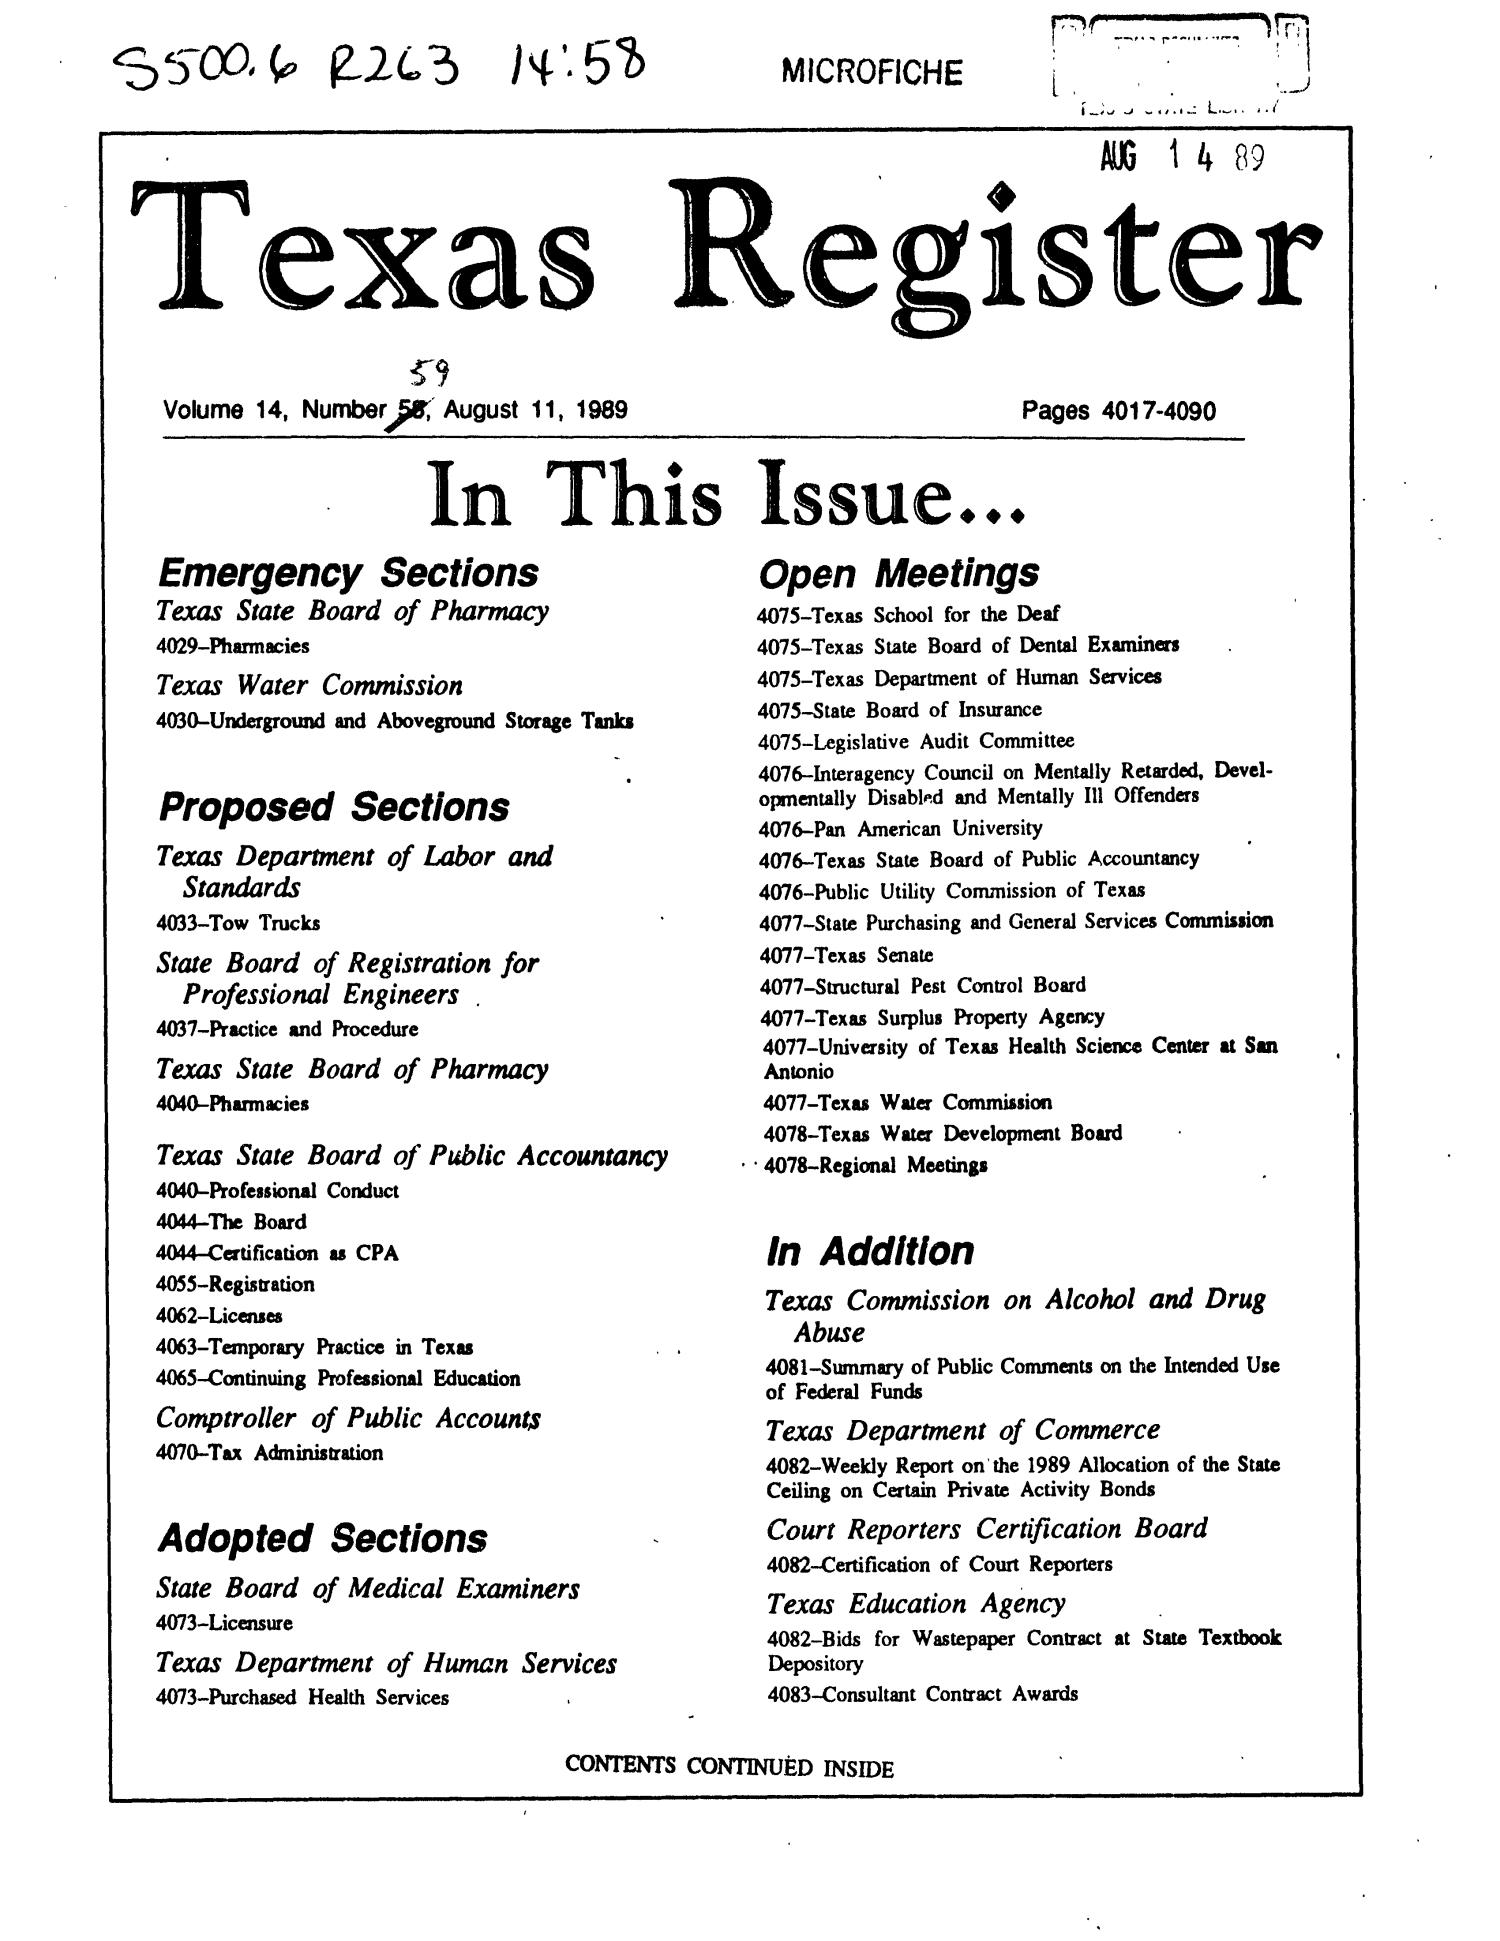 Texas Register, Volume 14, Number [59], Pages 4017-4090, August 15, 1989
                                                
                                                    Title Page
                                                